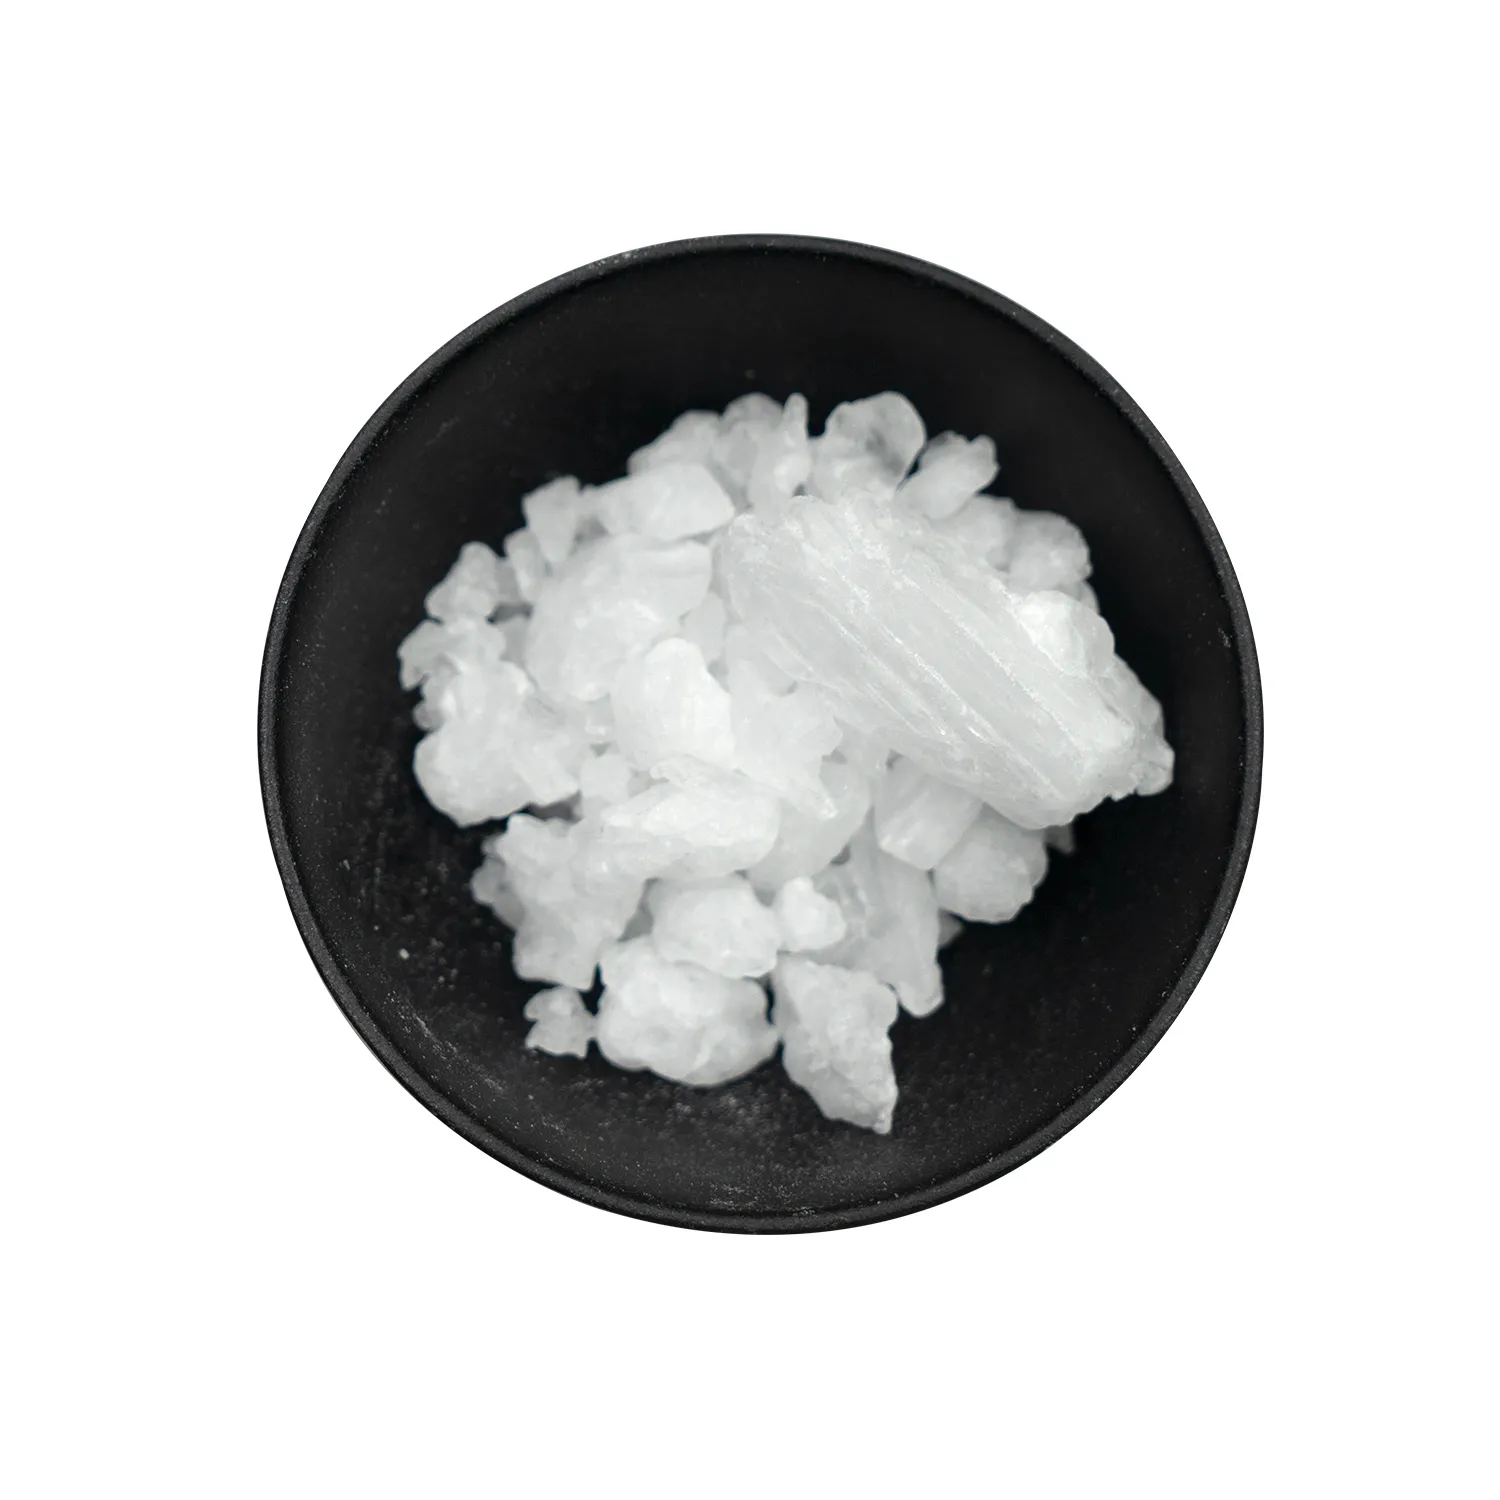 Crystal Menthol White crystal Australia hot sell 99% purity CAS 89-78-1